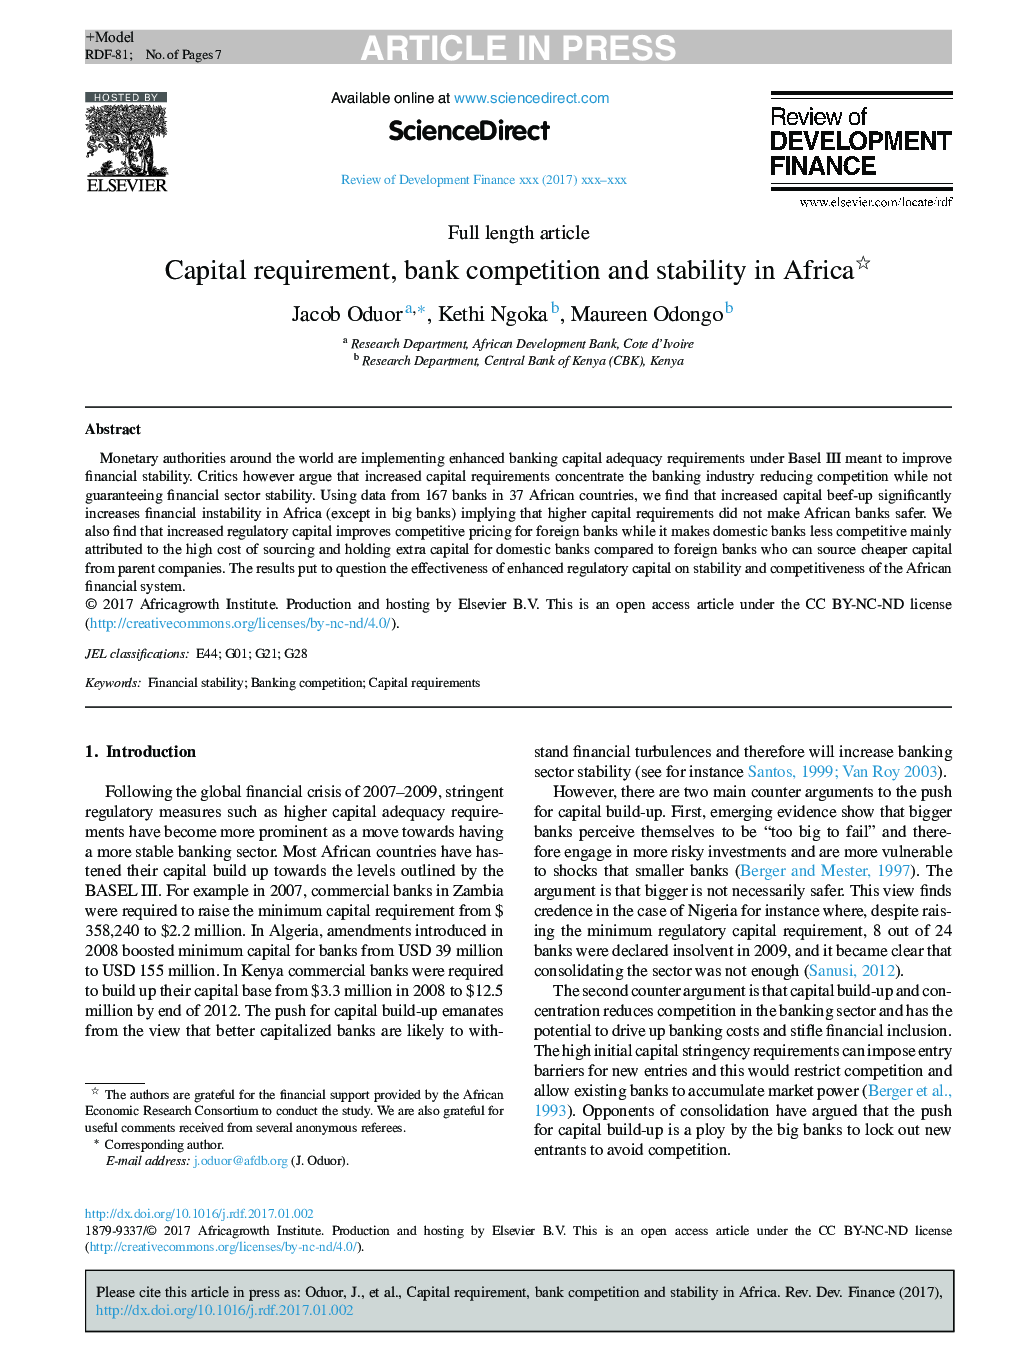 Capital requirement, bank competition and stability in Africa